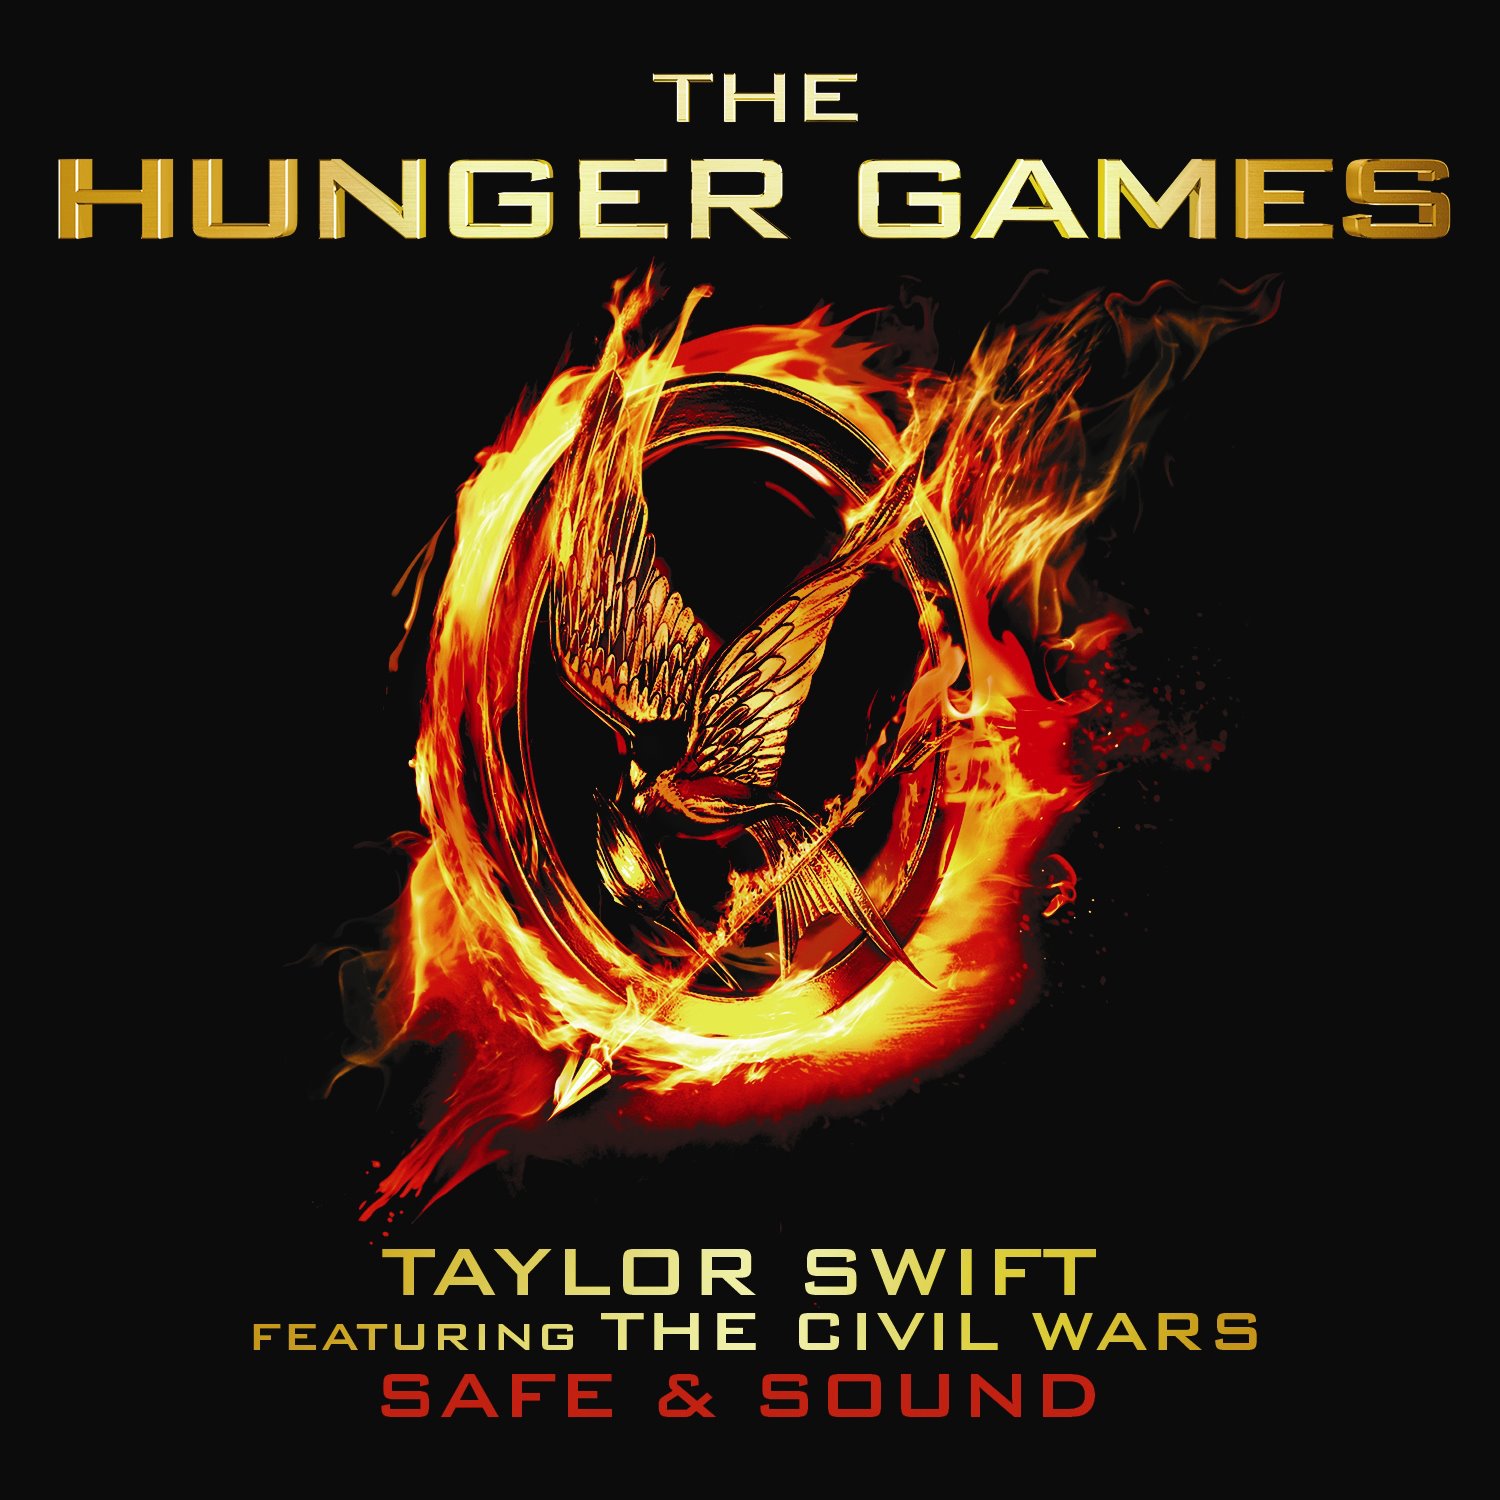 Various, The Hunger Games (Choral Highlights) (arr. Roger Emerson), SATB